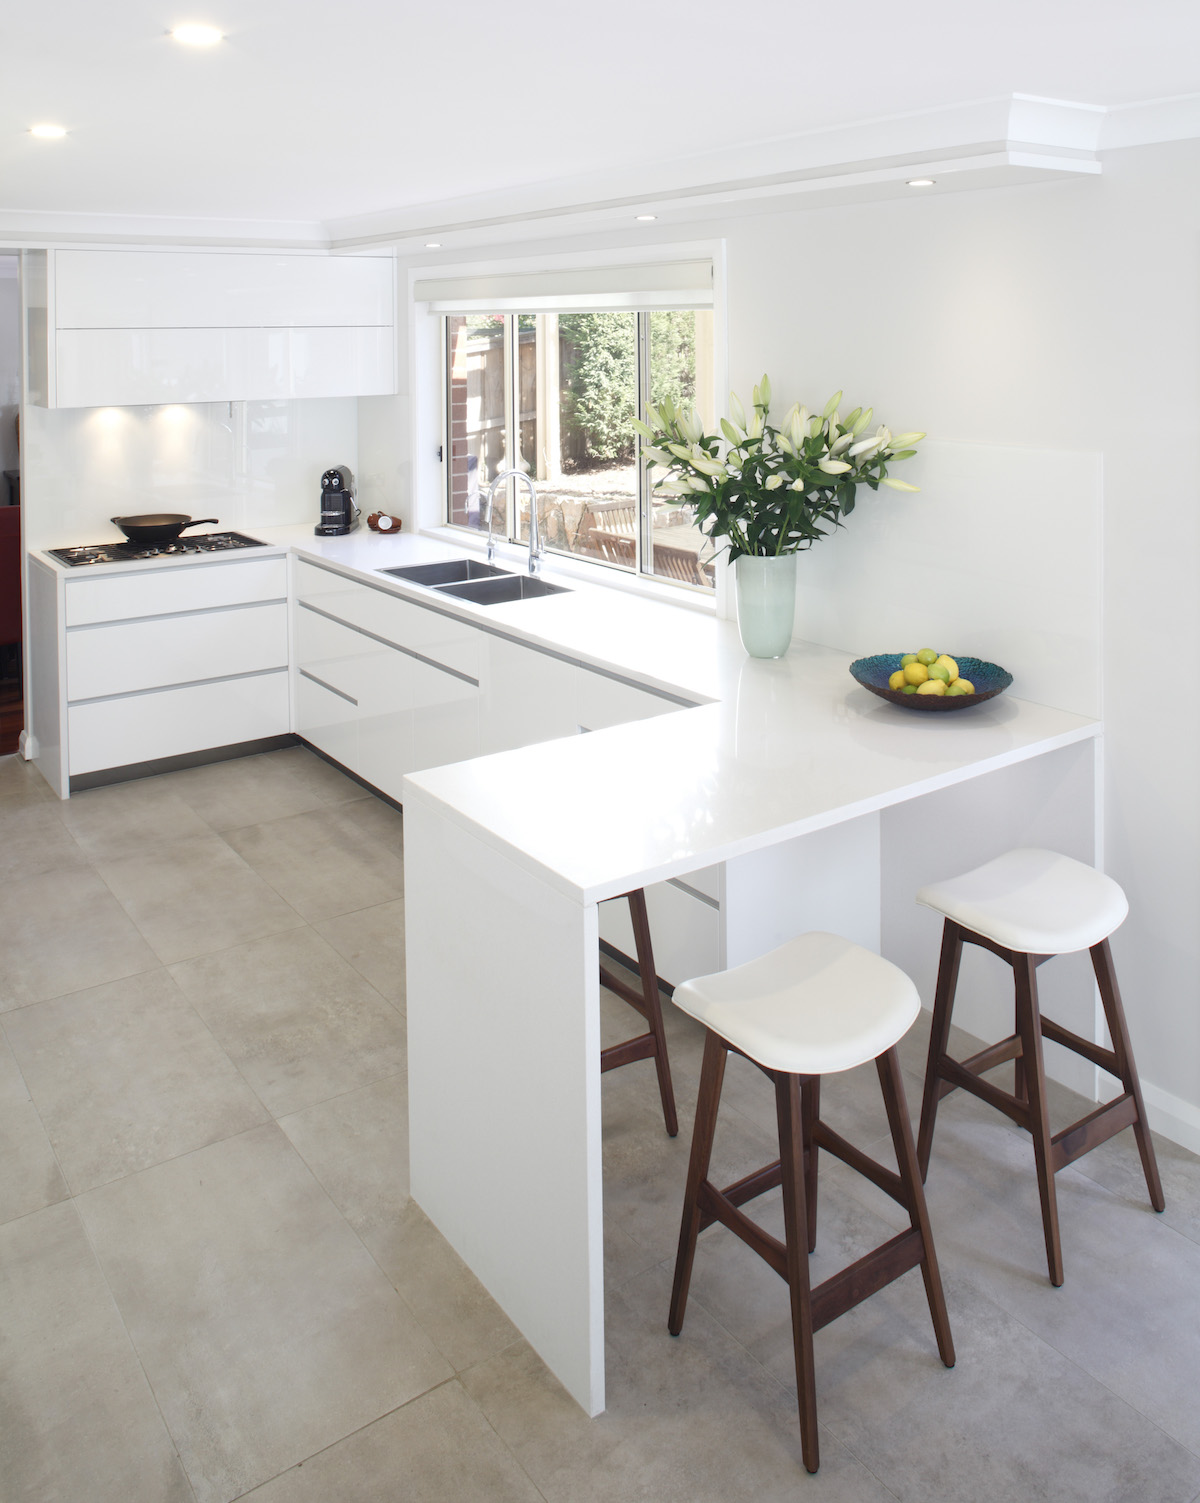 Dural - Attard's Kitchens & Cabinetry